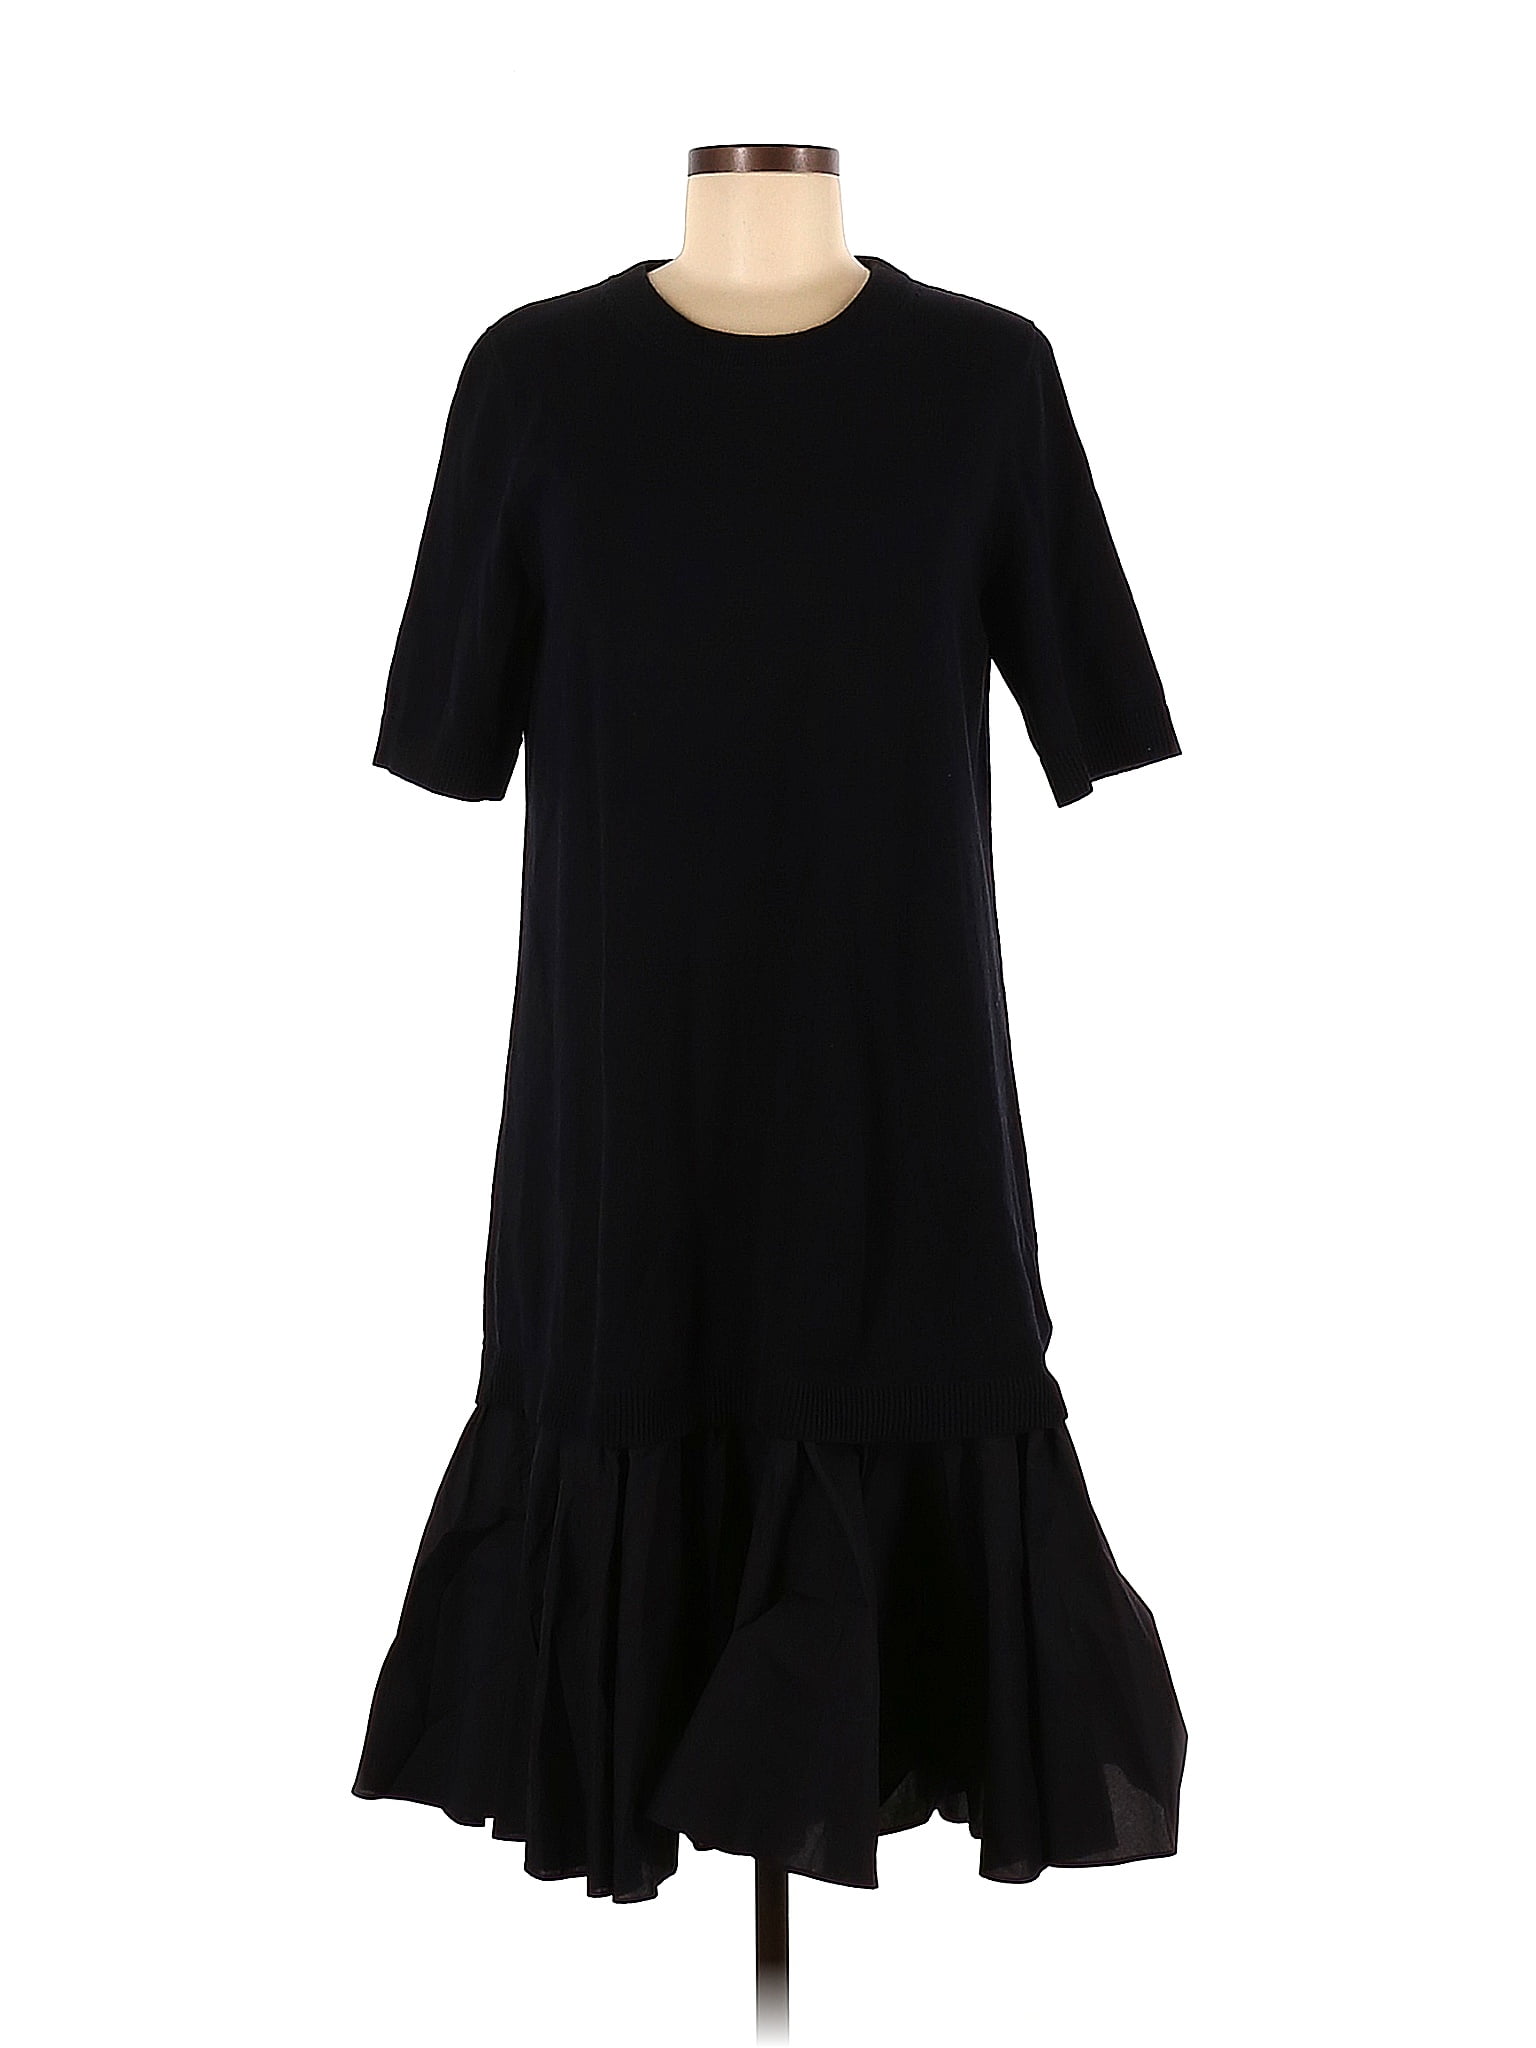 Cos 100% Cotton Solid Black Casual Dress Size M - 74% off | thredUP